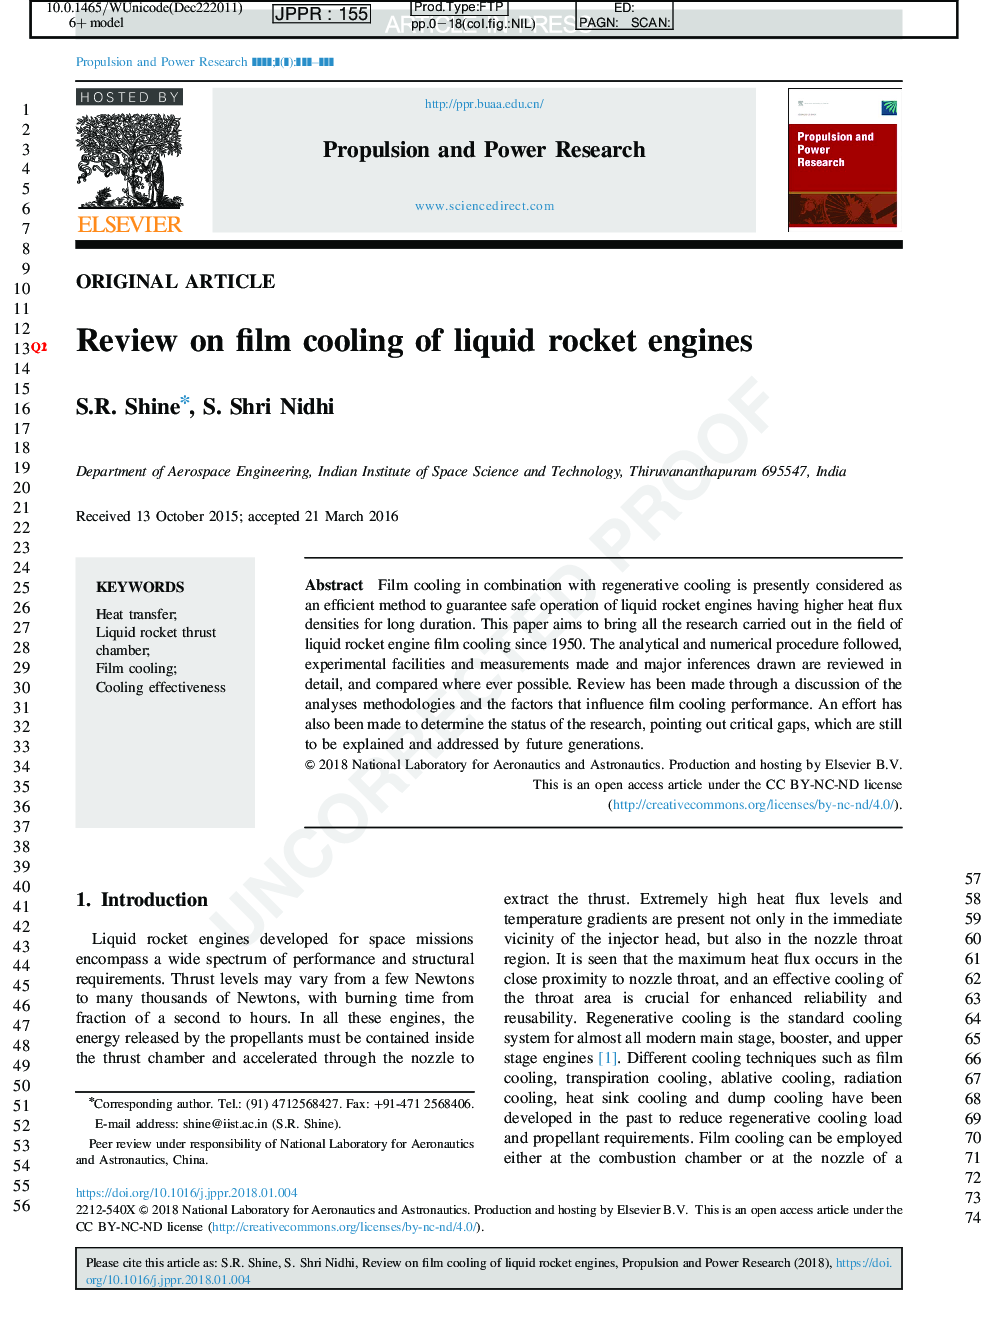 Review on film cooling of liquid rocket engines